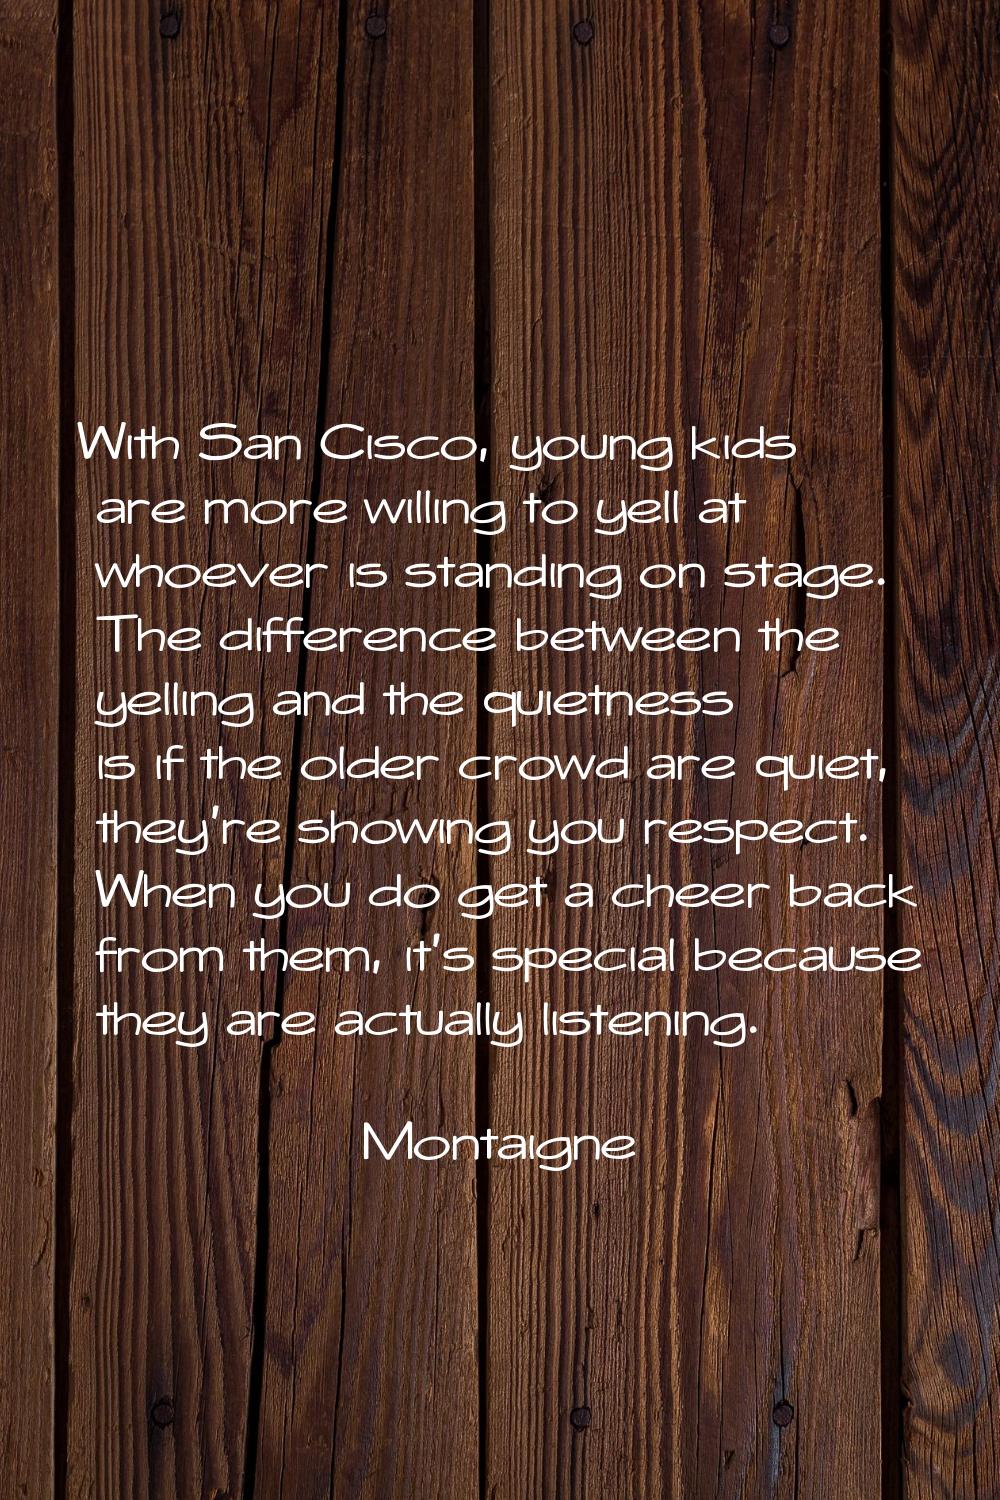 With San Cisco, young kids are more willing to yell at whoever is standing on stage. The difference